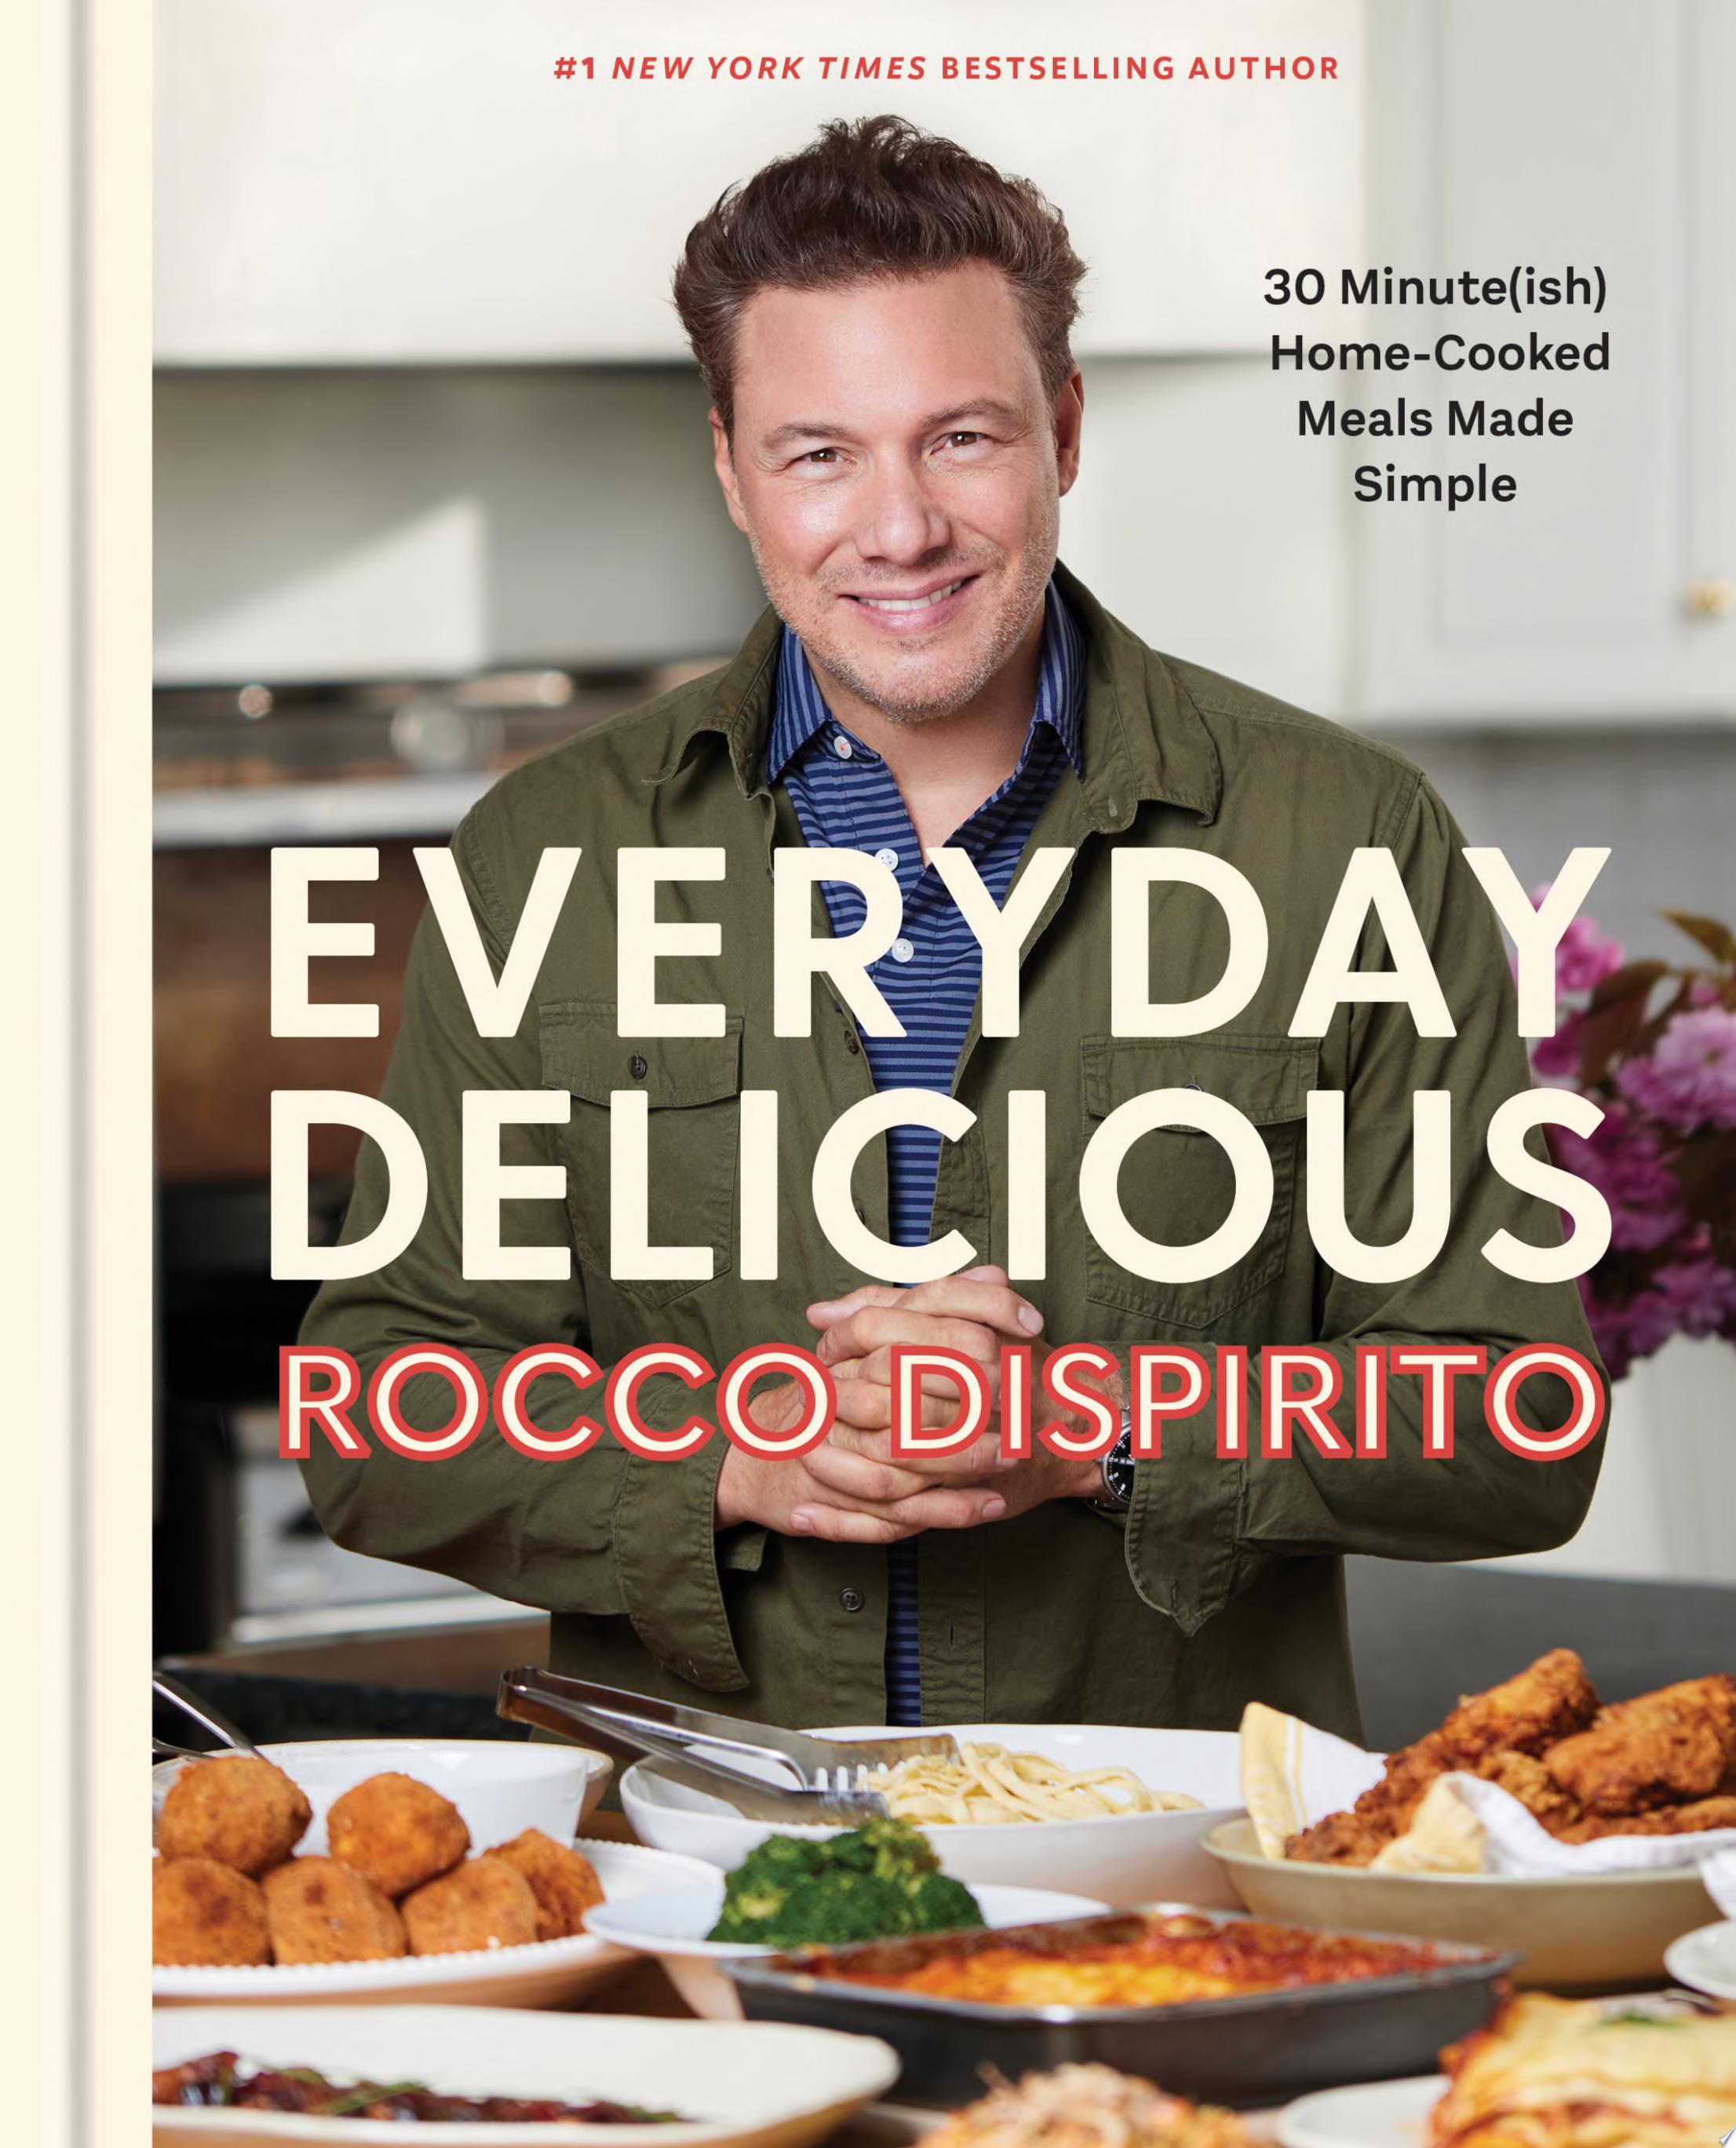 Image for "Everyday Delicious"